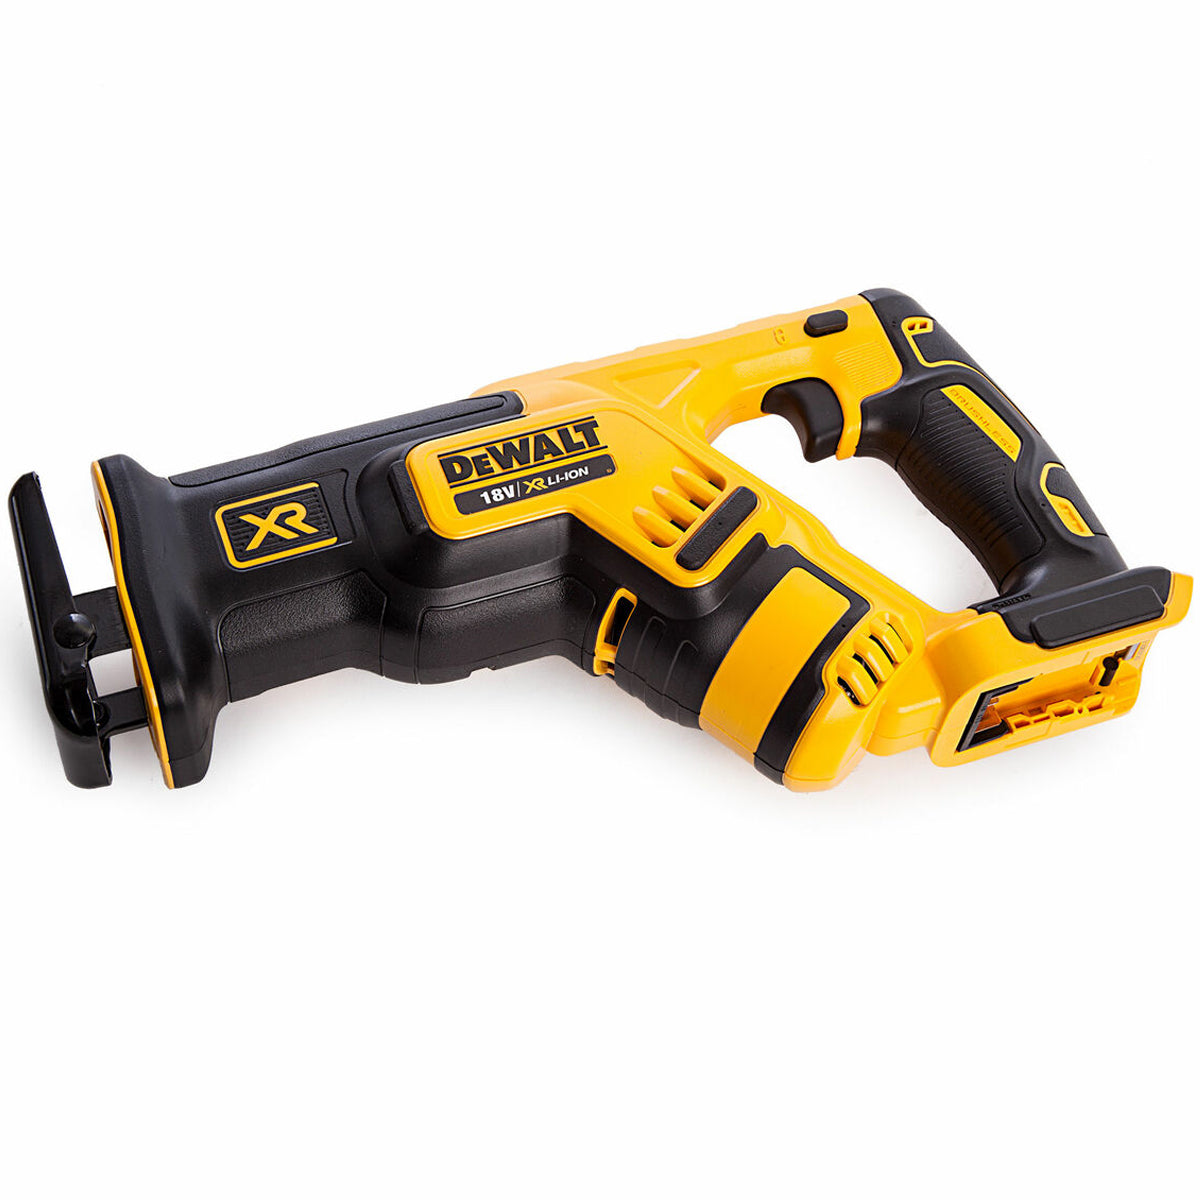 DeWalt DCS367N 18V Brushless Compact Reciprocating Saw Body Only